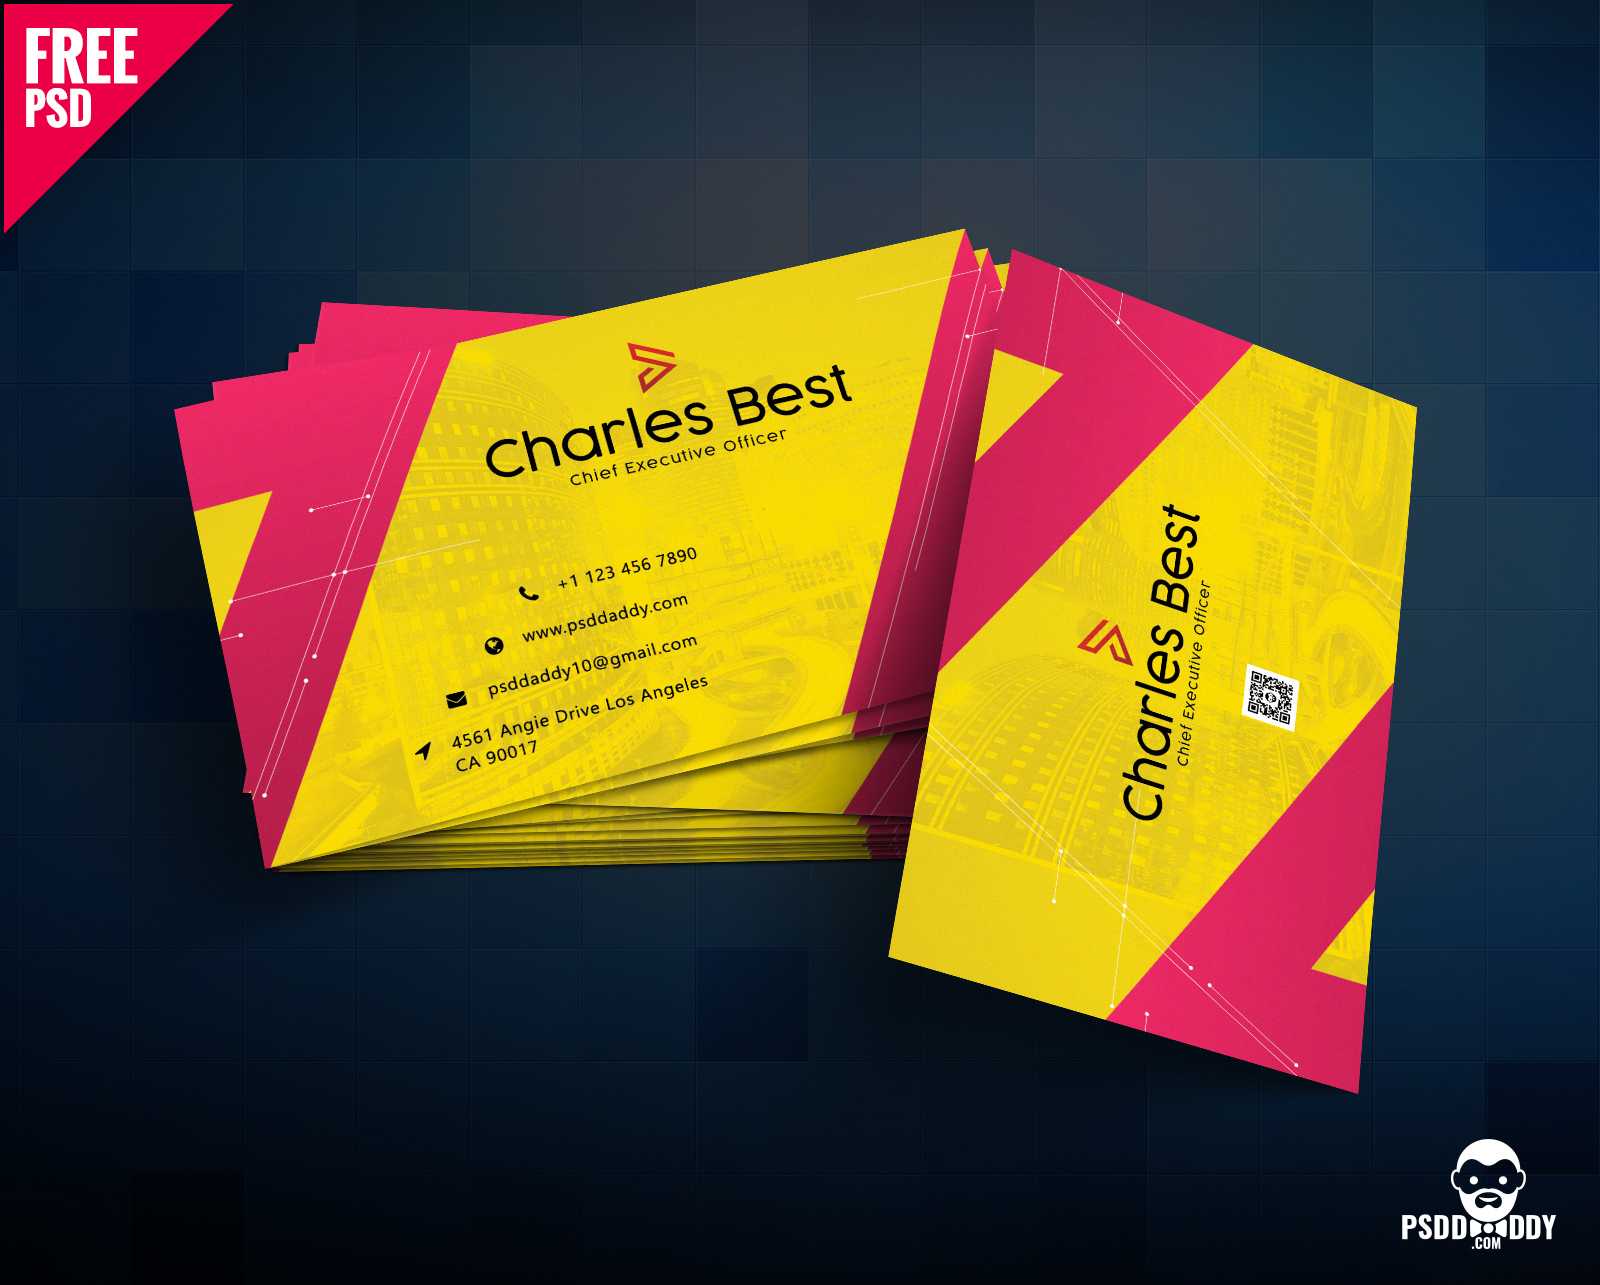 Download] Creative Business Card Free Psd | Psddaddy Intended For Calling Card Template Psd